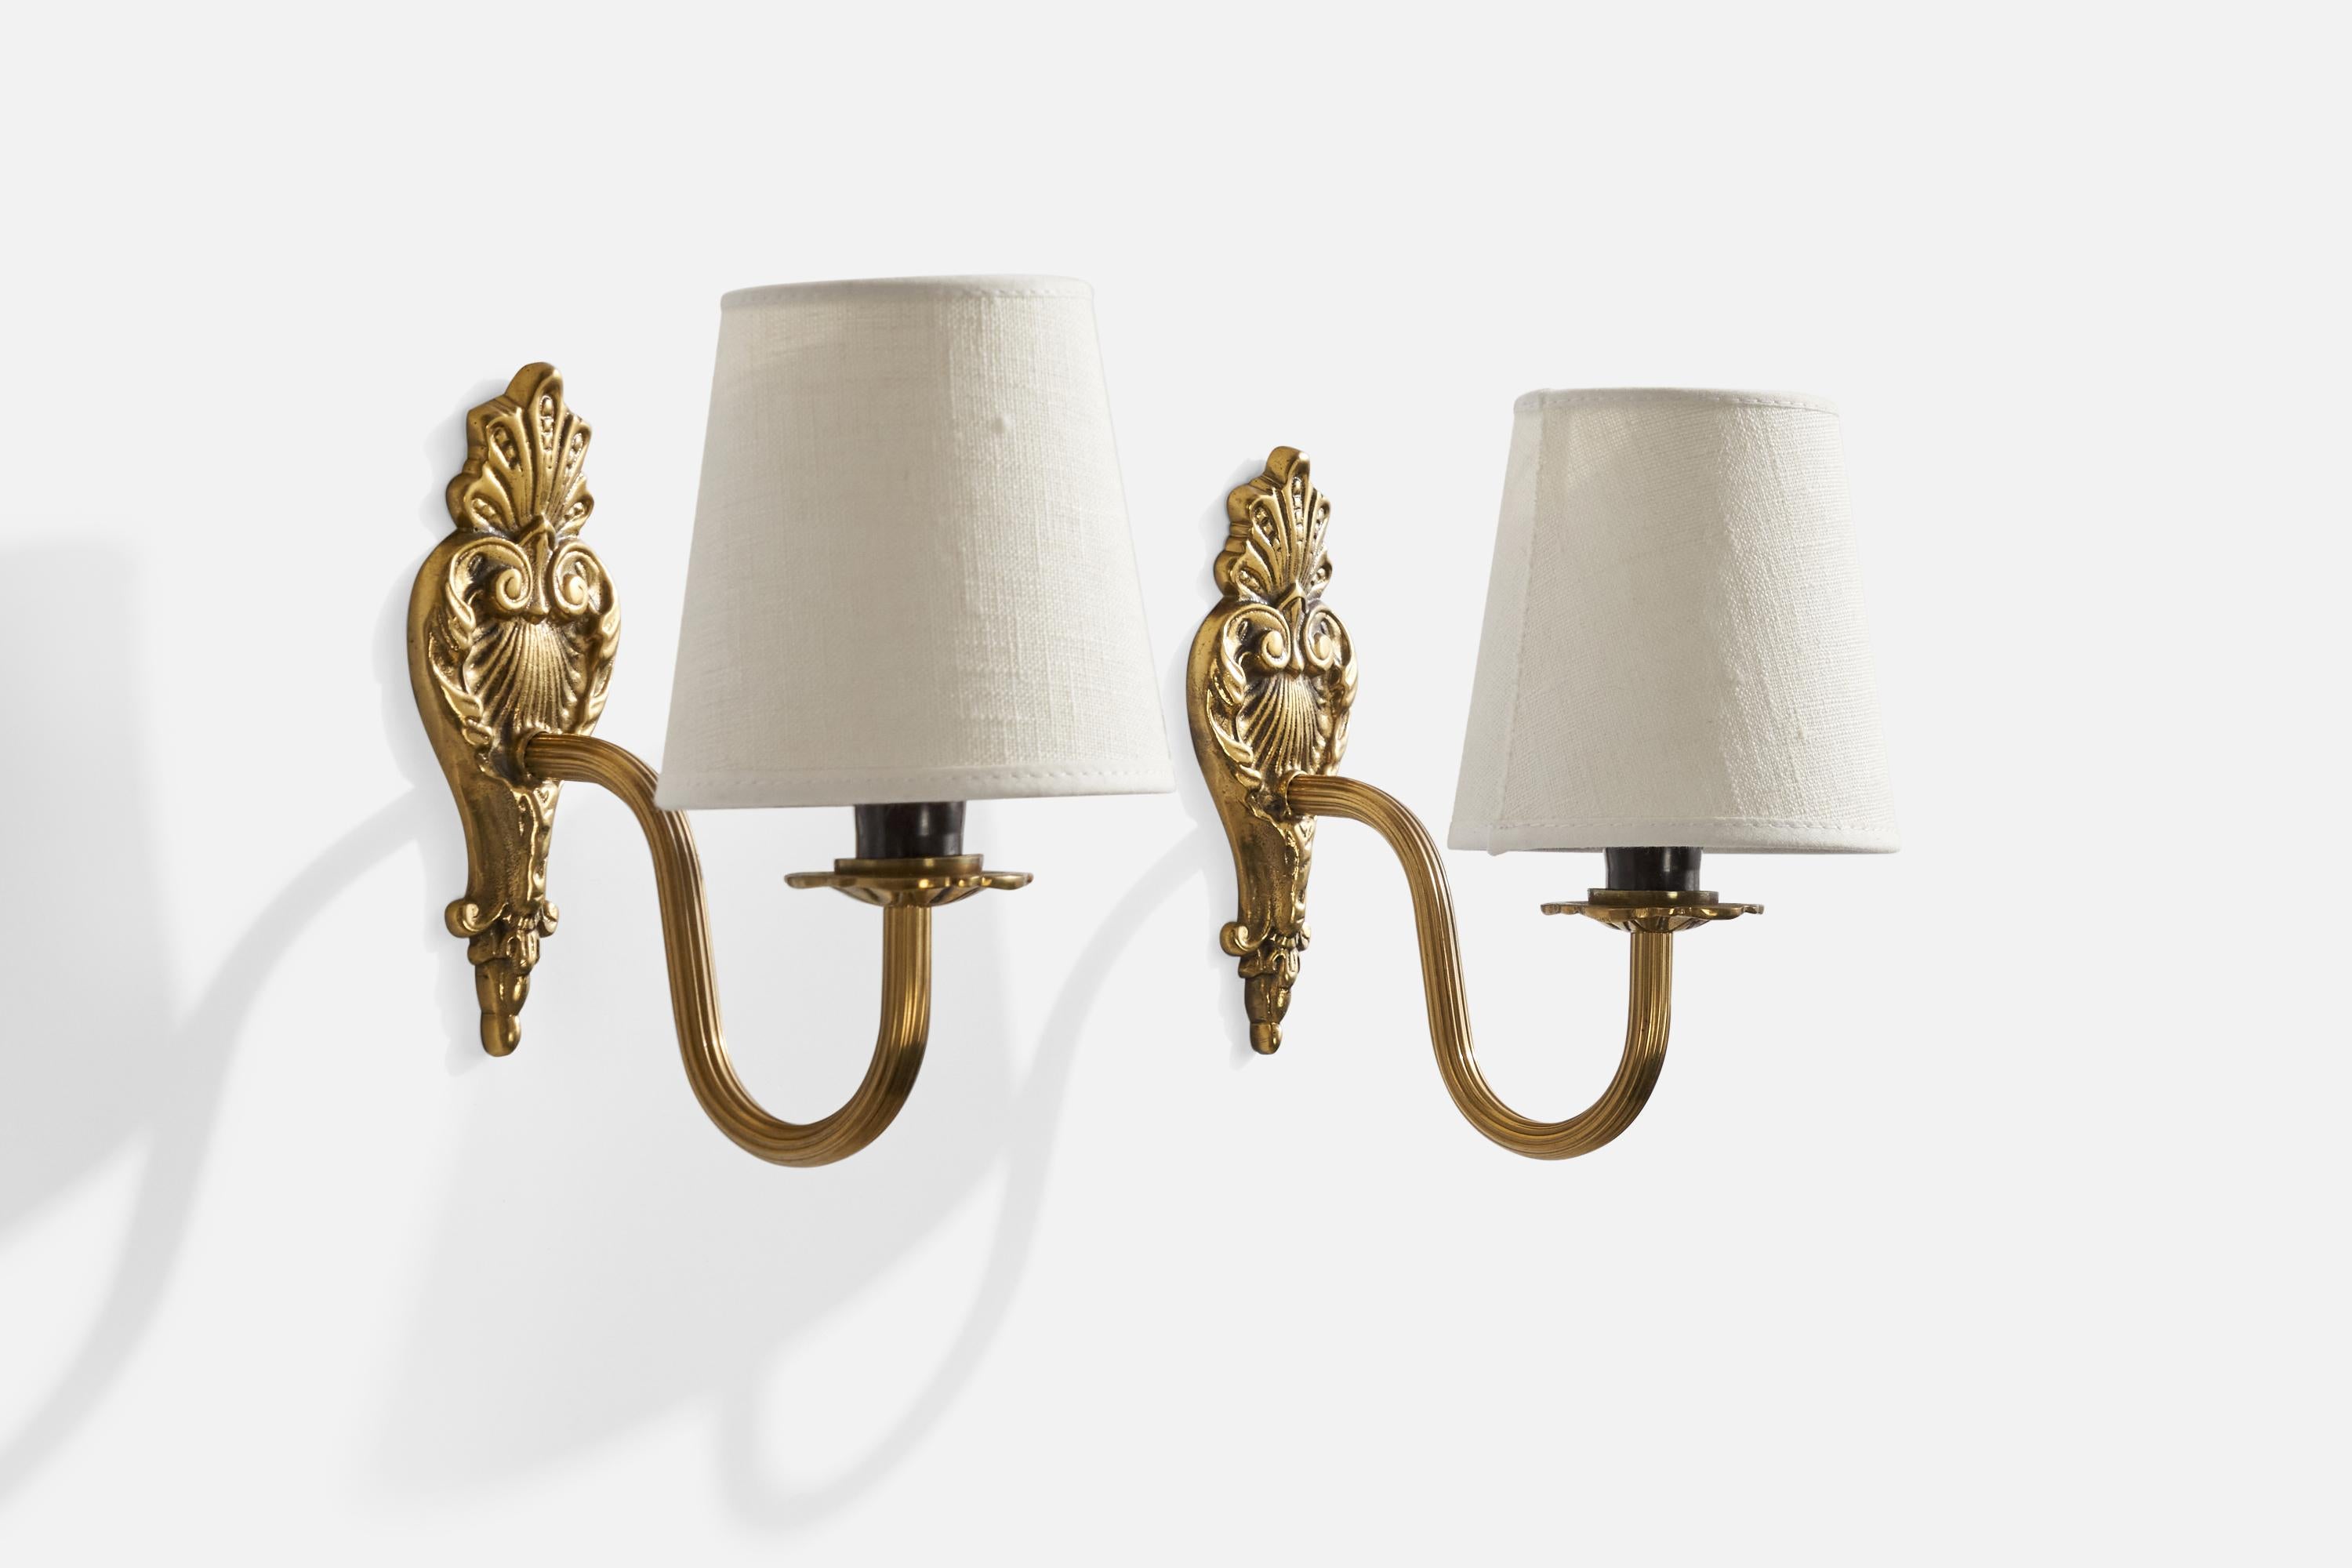 A pair of brass and white fabric wall lights designed and produced in sweden, 1940s.

Overall Dimensions (inches): 8.5” H x 5” W x 7.5” D
Back Plate Dimensions (inches): N/A
Bulb Specifications: E-14 Bulb
Number of Sockets: 2
All lighting will be